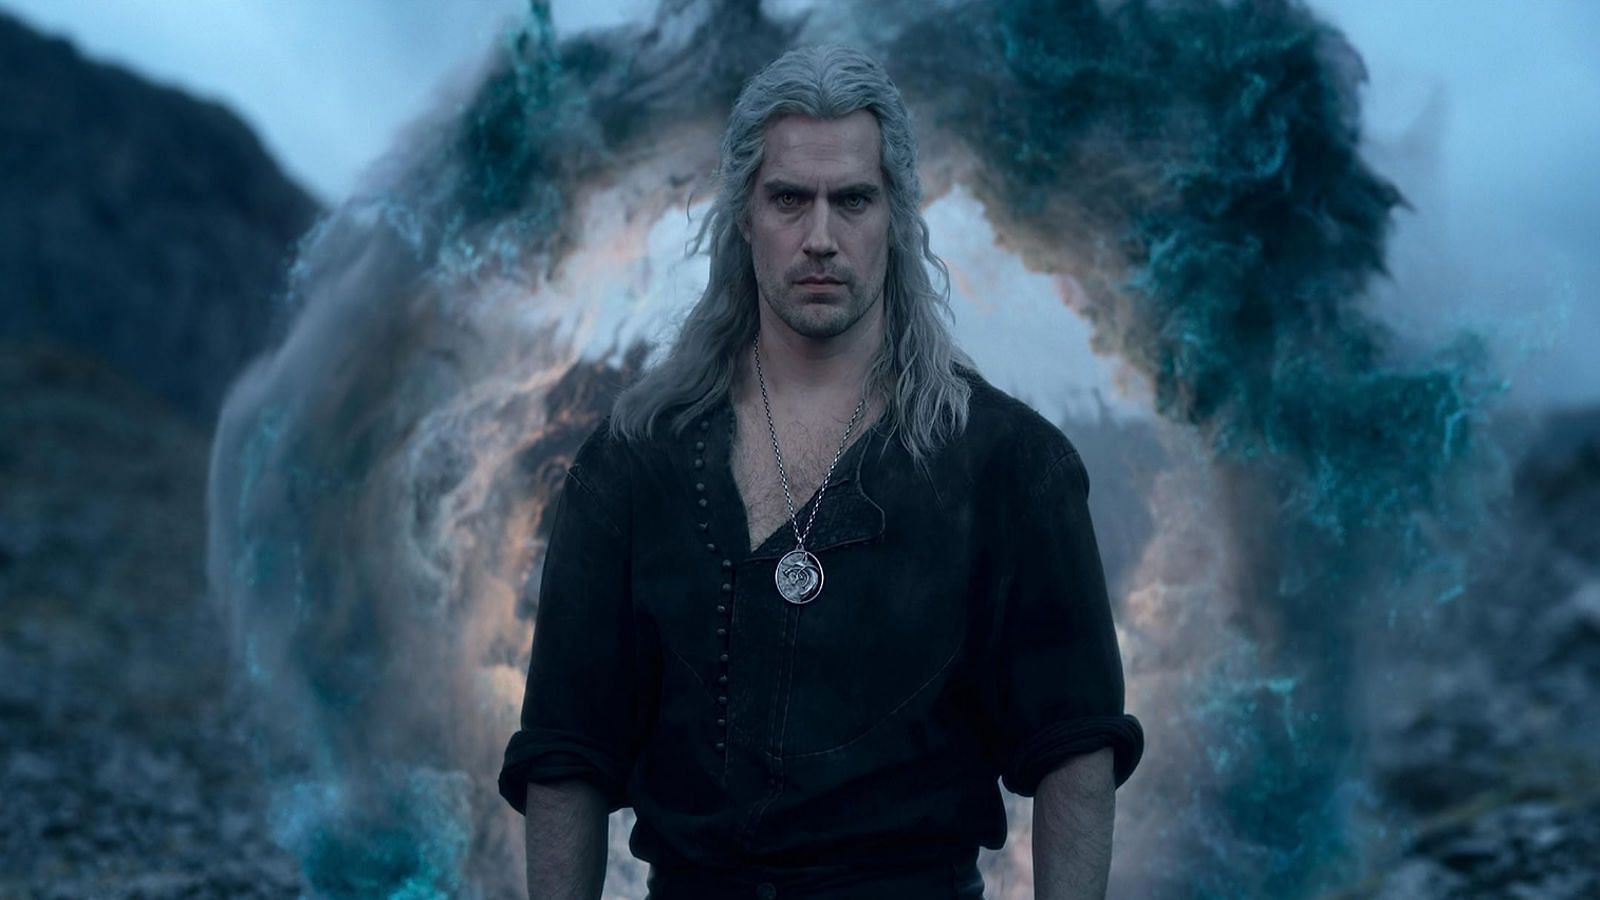 The Witcher Season 4: New Geralt, Story Details & Everything We Know - IMDb